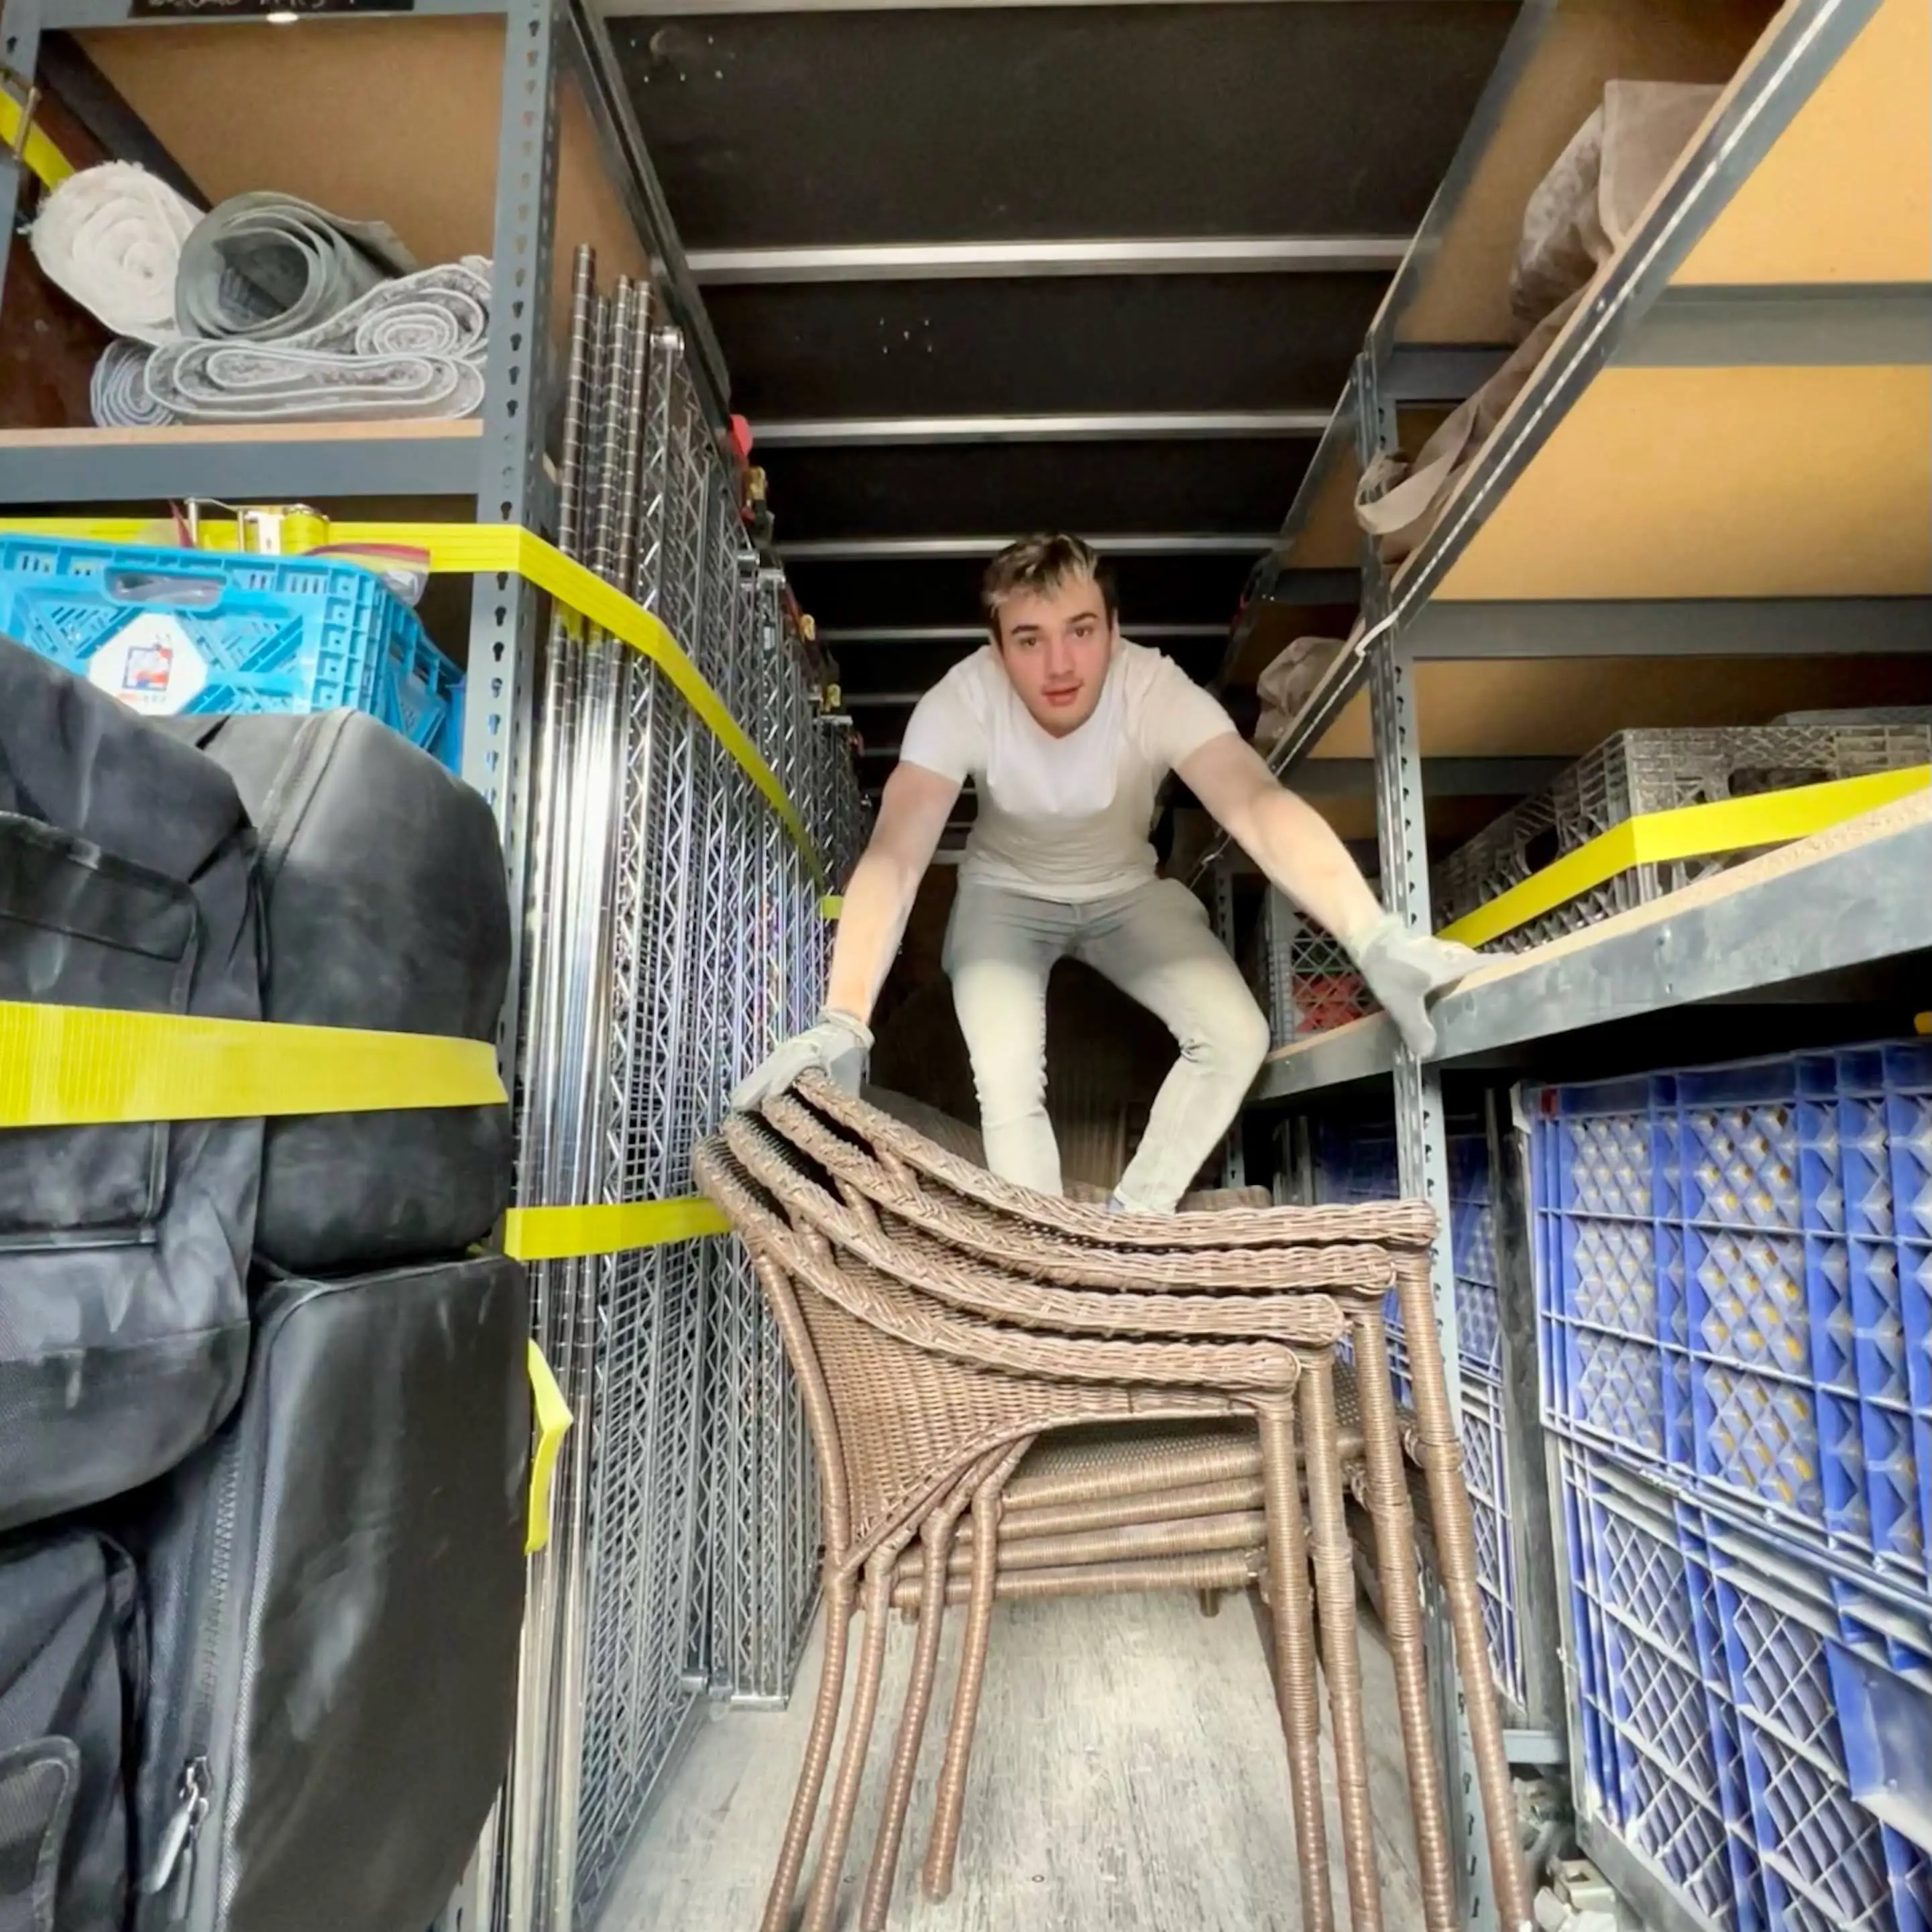 Inside the storage trailer of the Future Turtles, a young man in a white T-shirt and work gloves is climbing on a stack of wicker benches. To his left and right are shelves filled with boxes of gear.